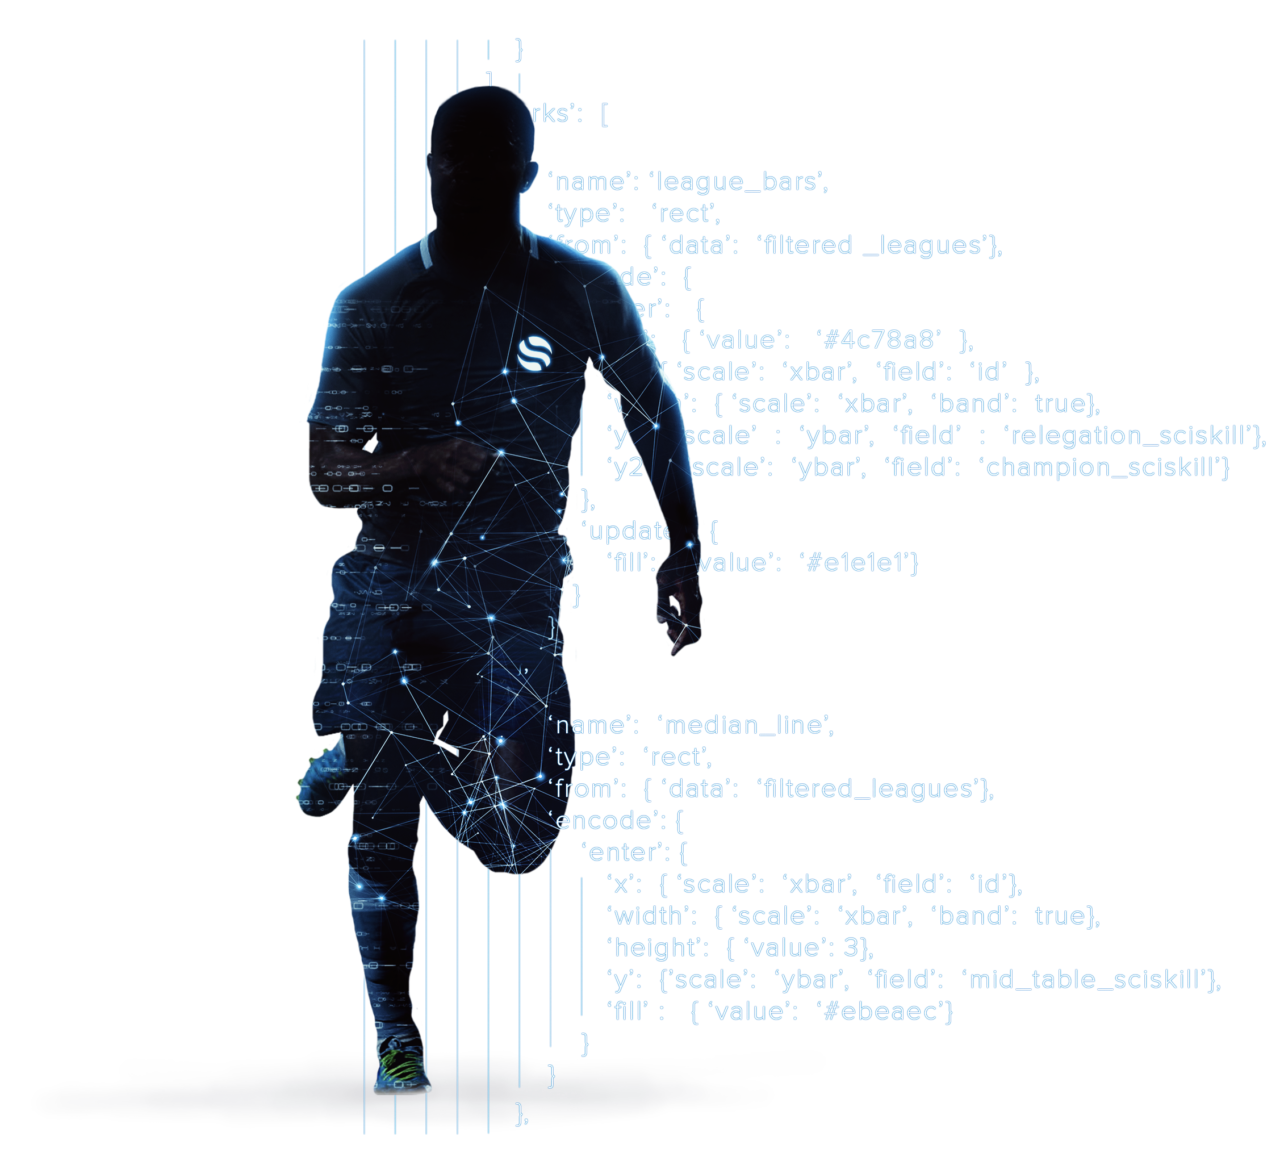 Visualisation of a unknown SciSports football player and data surrounding him